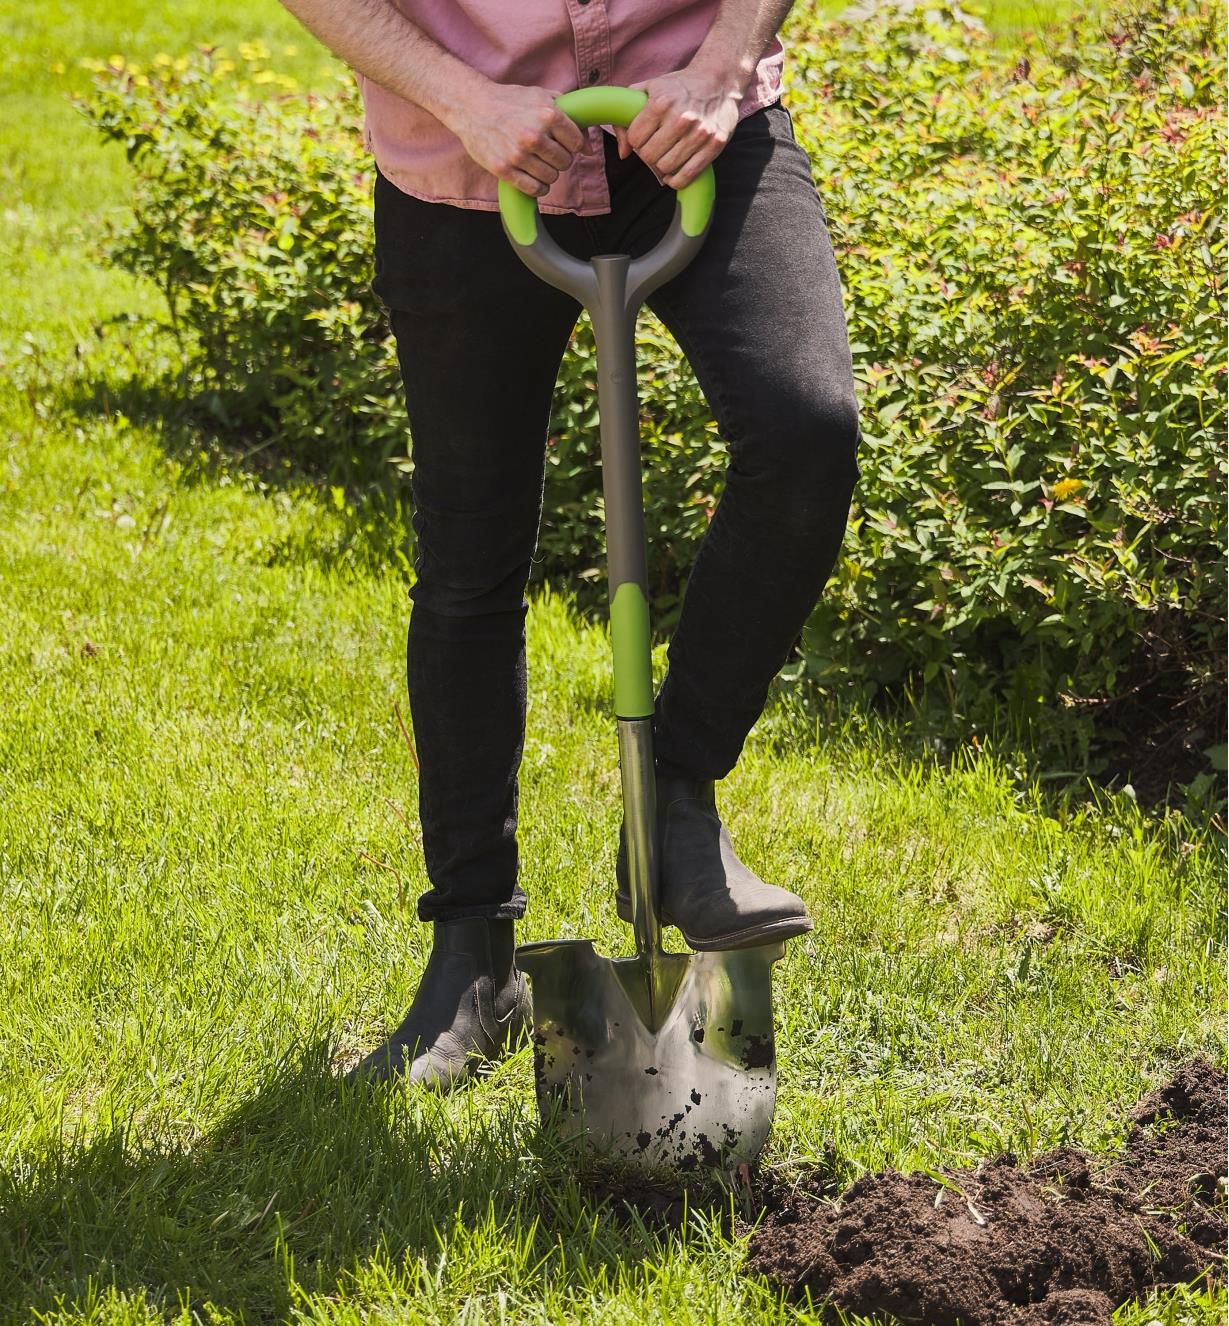 A person using an ergonomic shovel to dig in a lawn